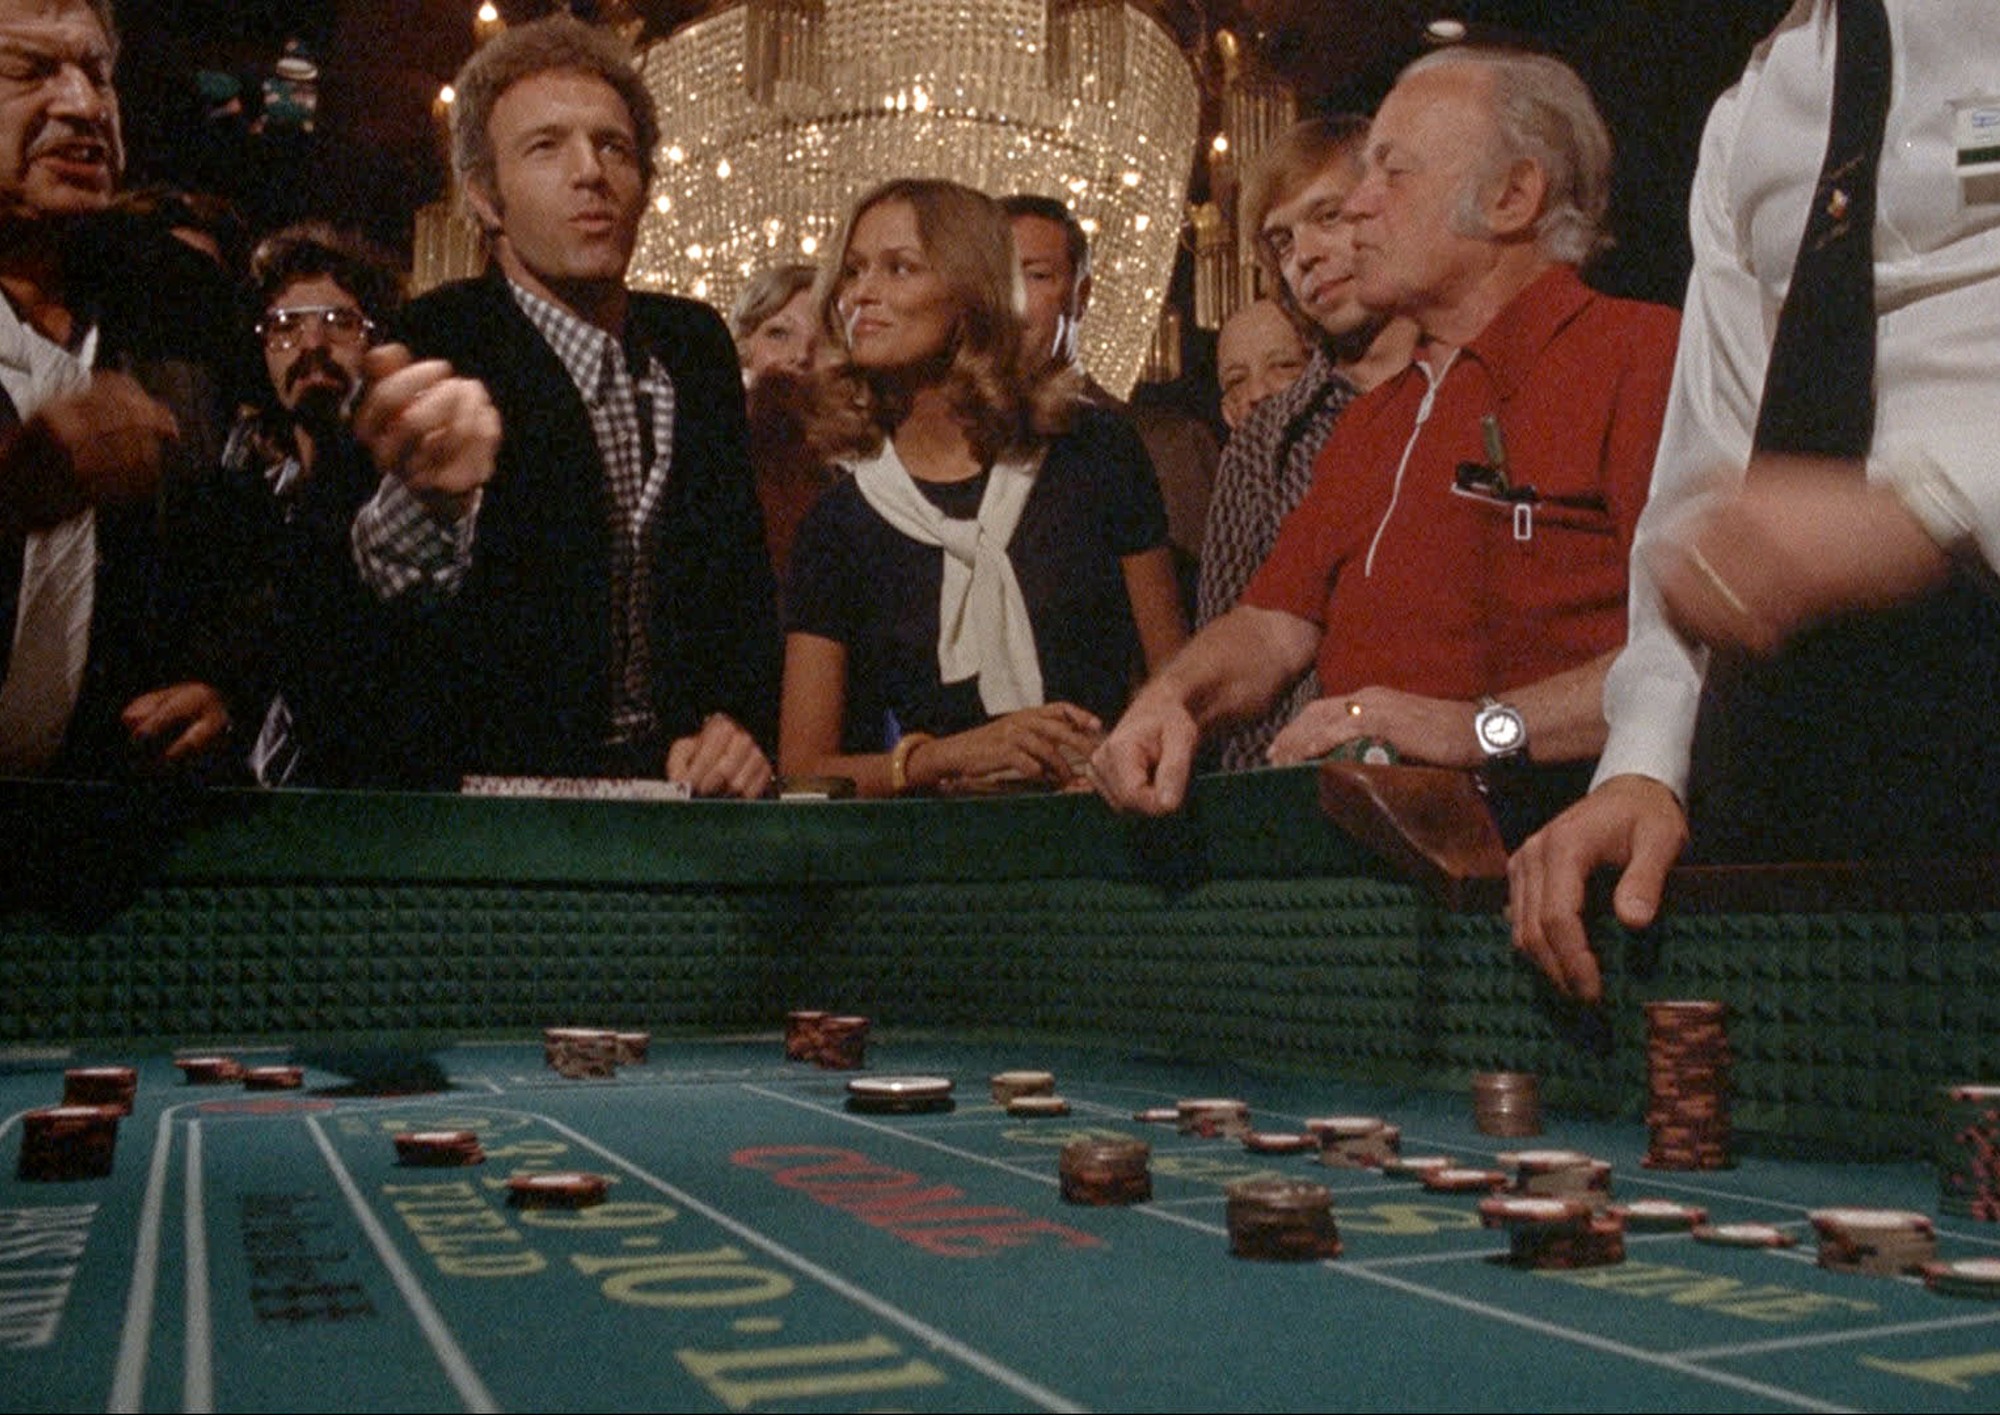 Image from the 1974 motion picture The Gambler